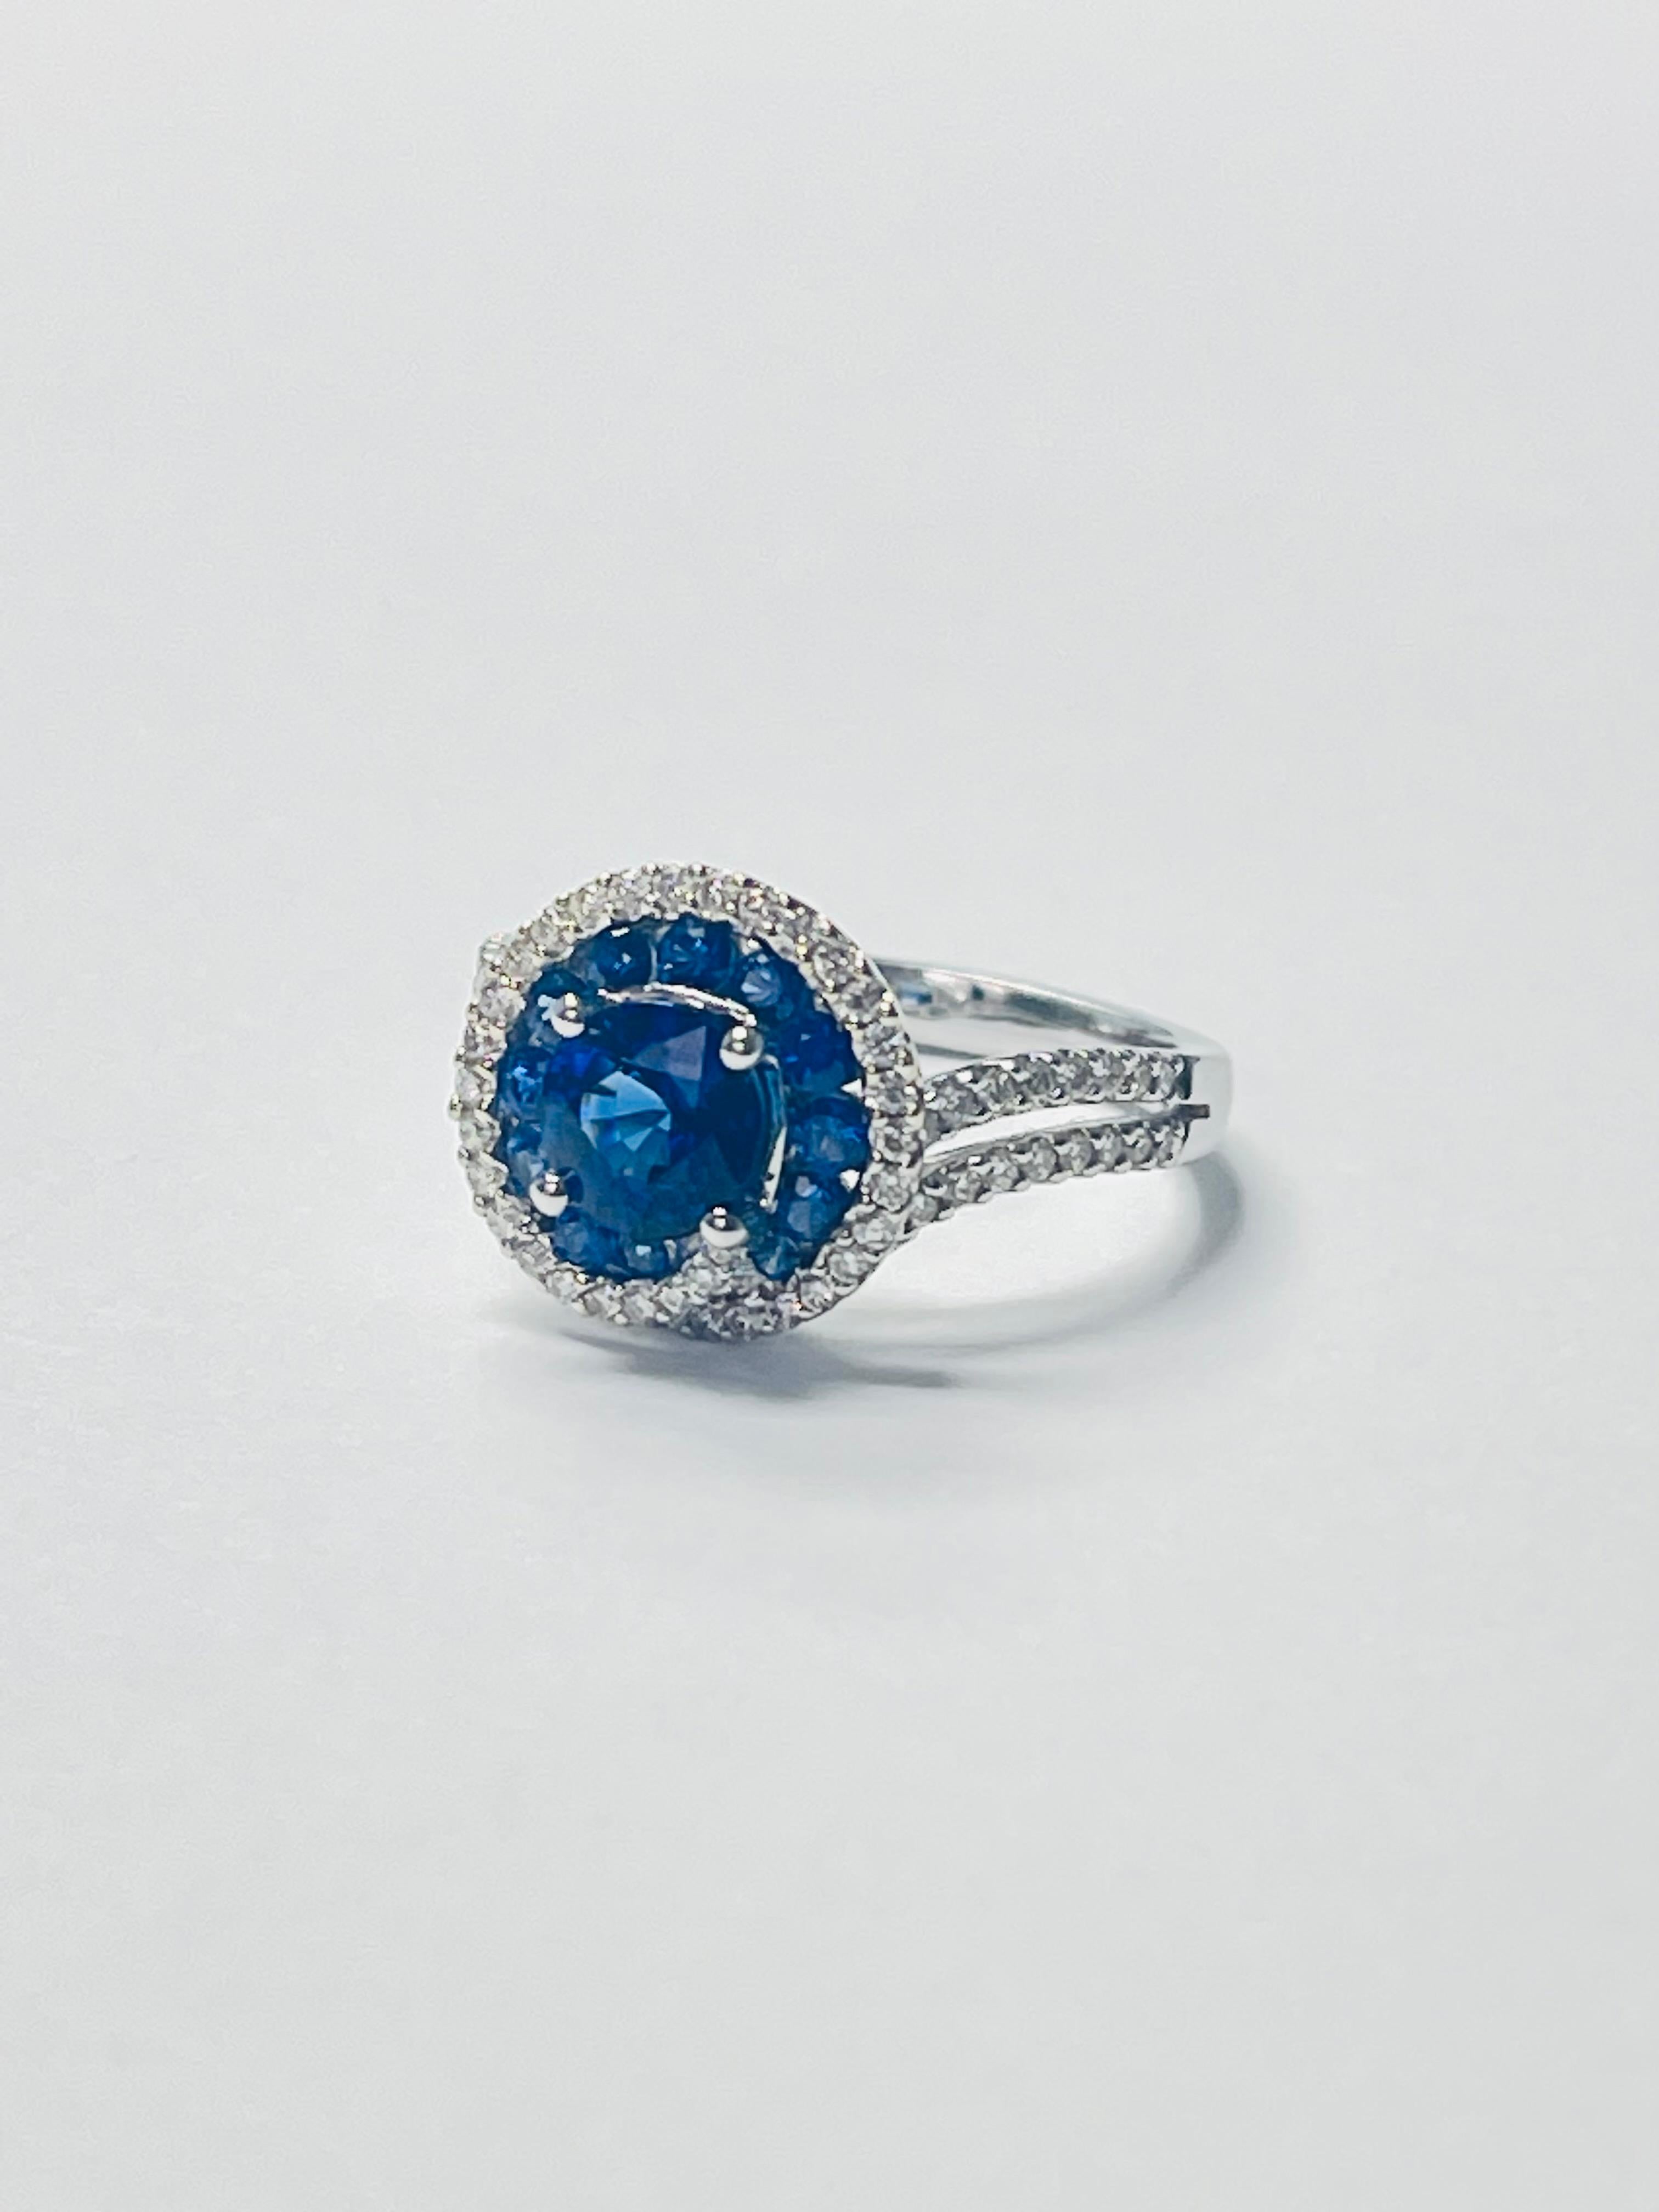 Blue Sapphire and Diamond ring beautifully handcrafted in 18k white gold. 
The details are as follows : 
Blue sapphire weight : 1.45 carat 
Diamond weight : 0.43 carat 
Metal : 18K white gold 
Measurements : ring head : 11.8mm by 12.3mm
Ring size : 6